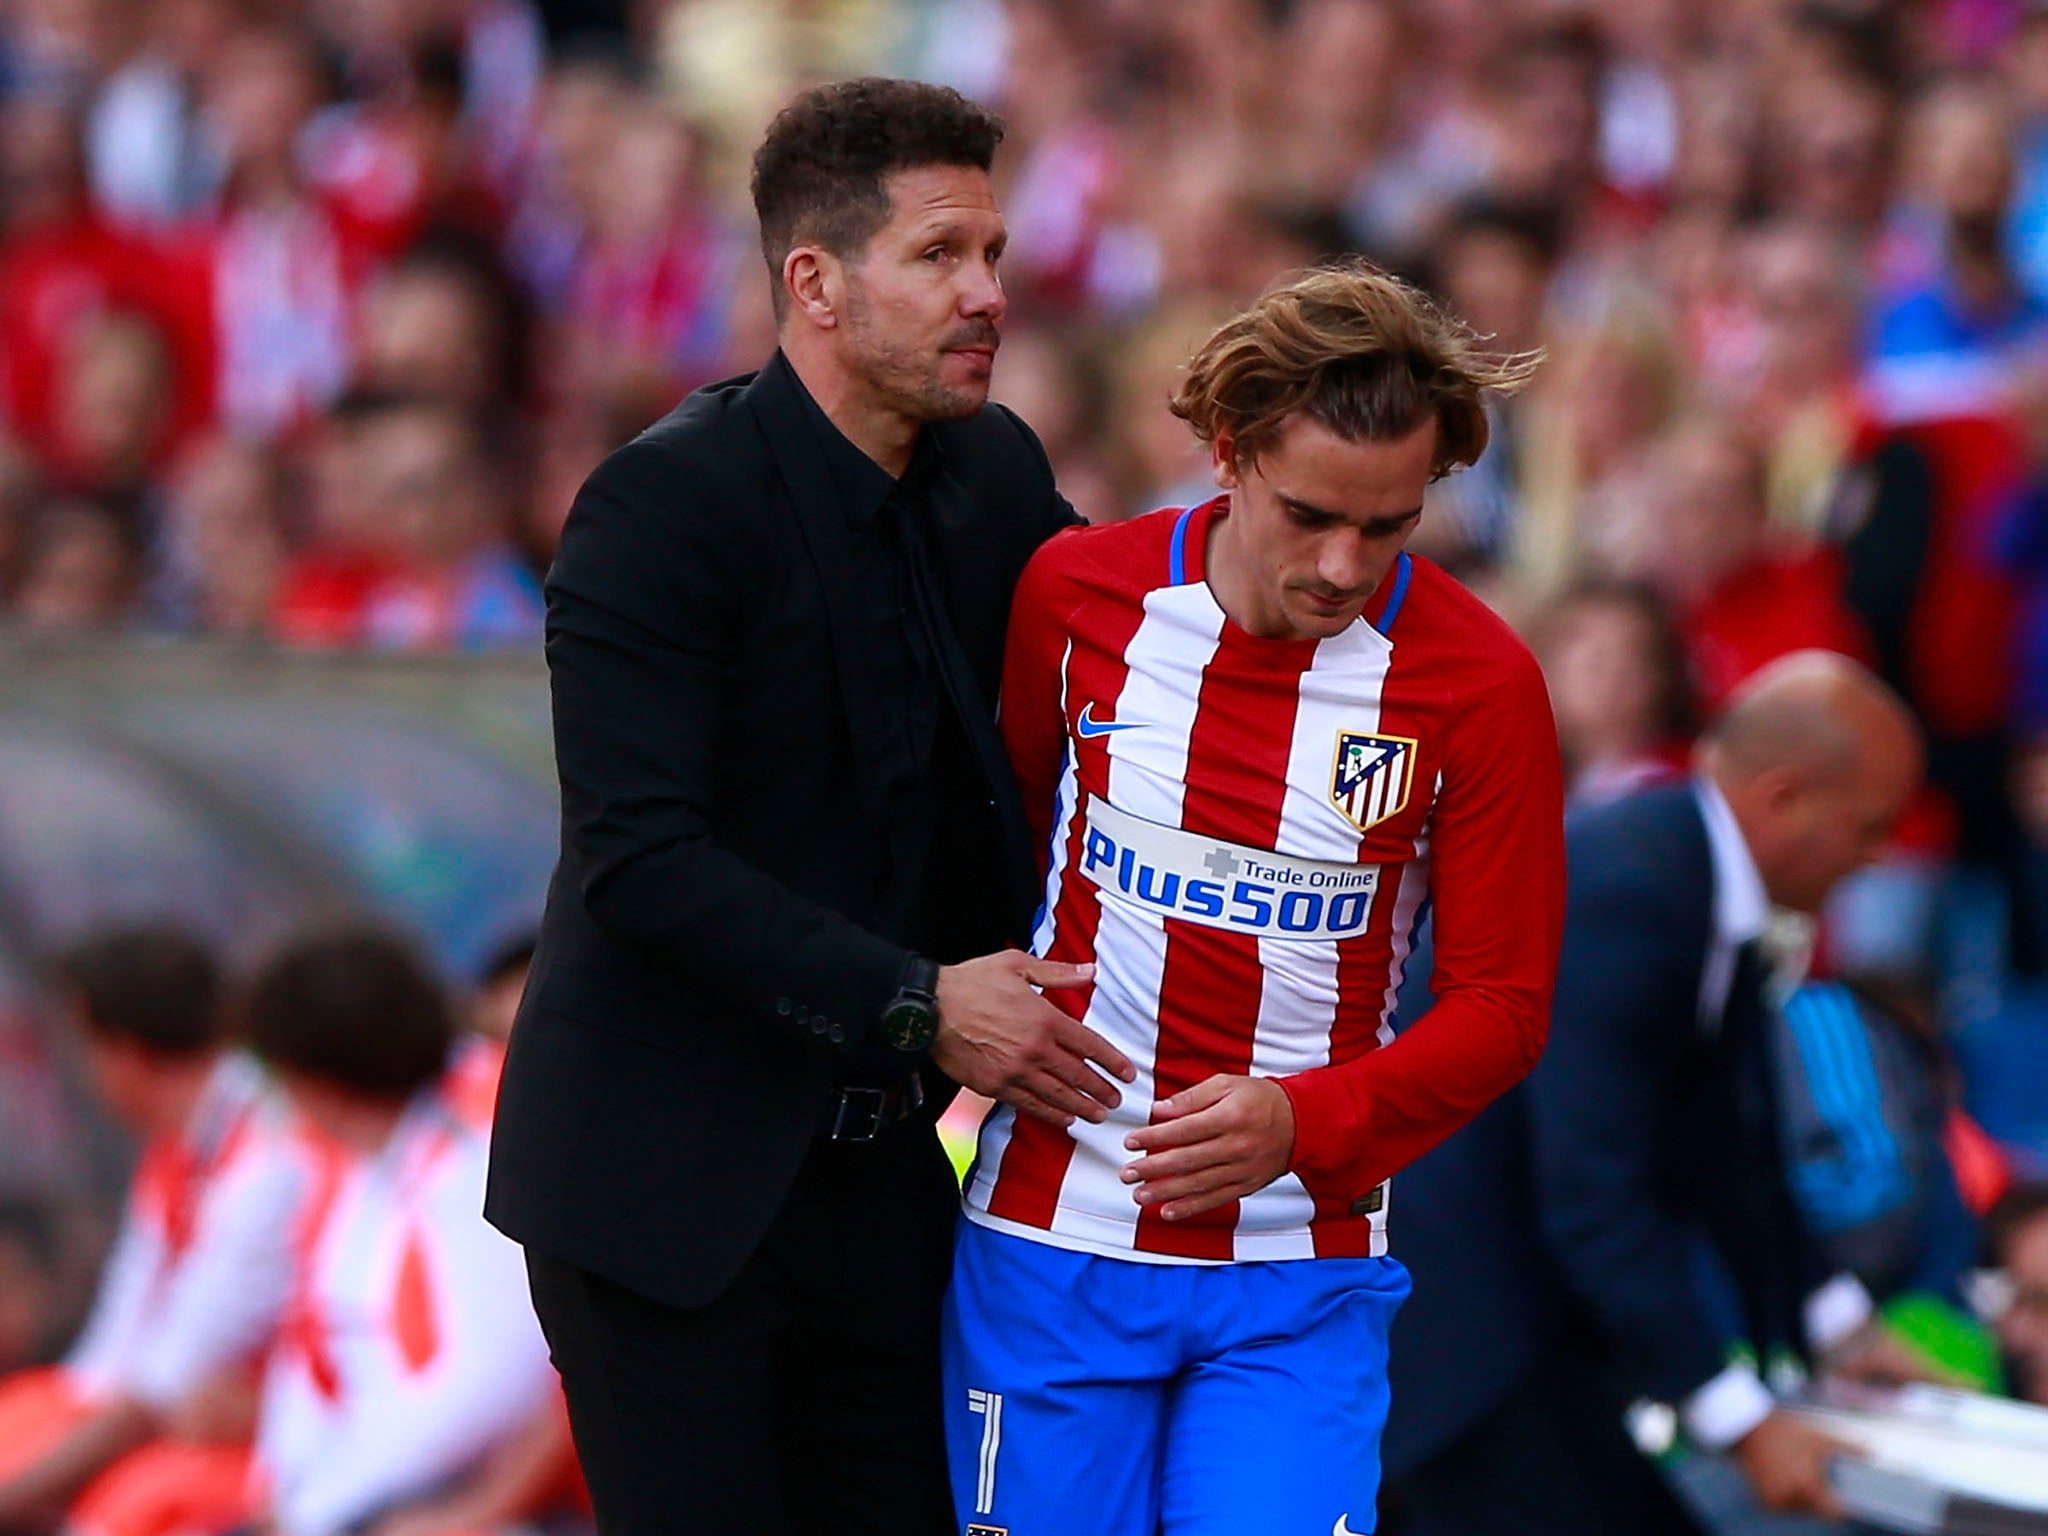 Simeone's transfer plans are up in the air - and that could change Griezmann's